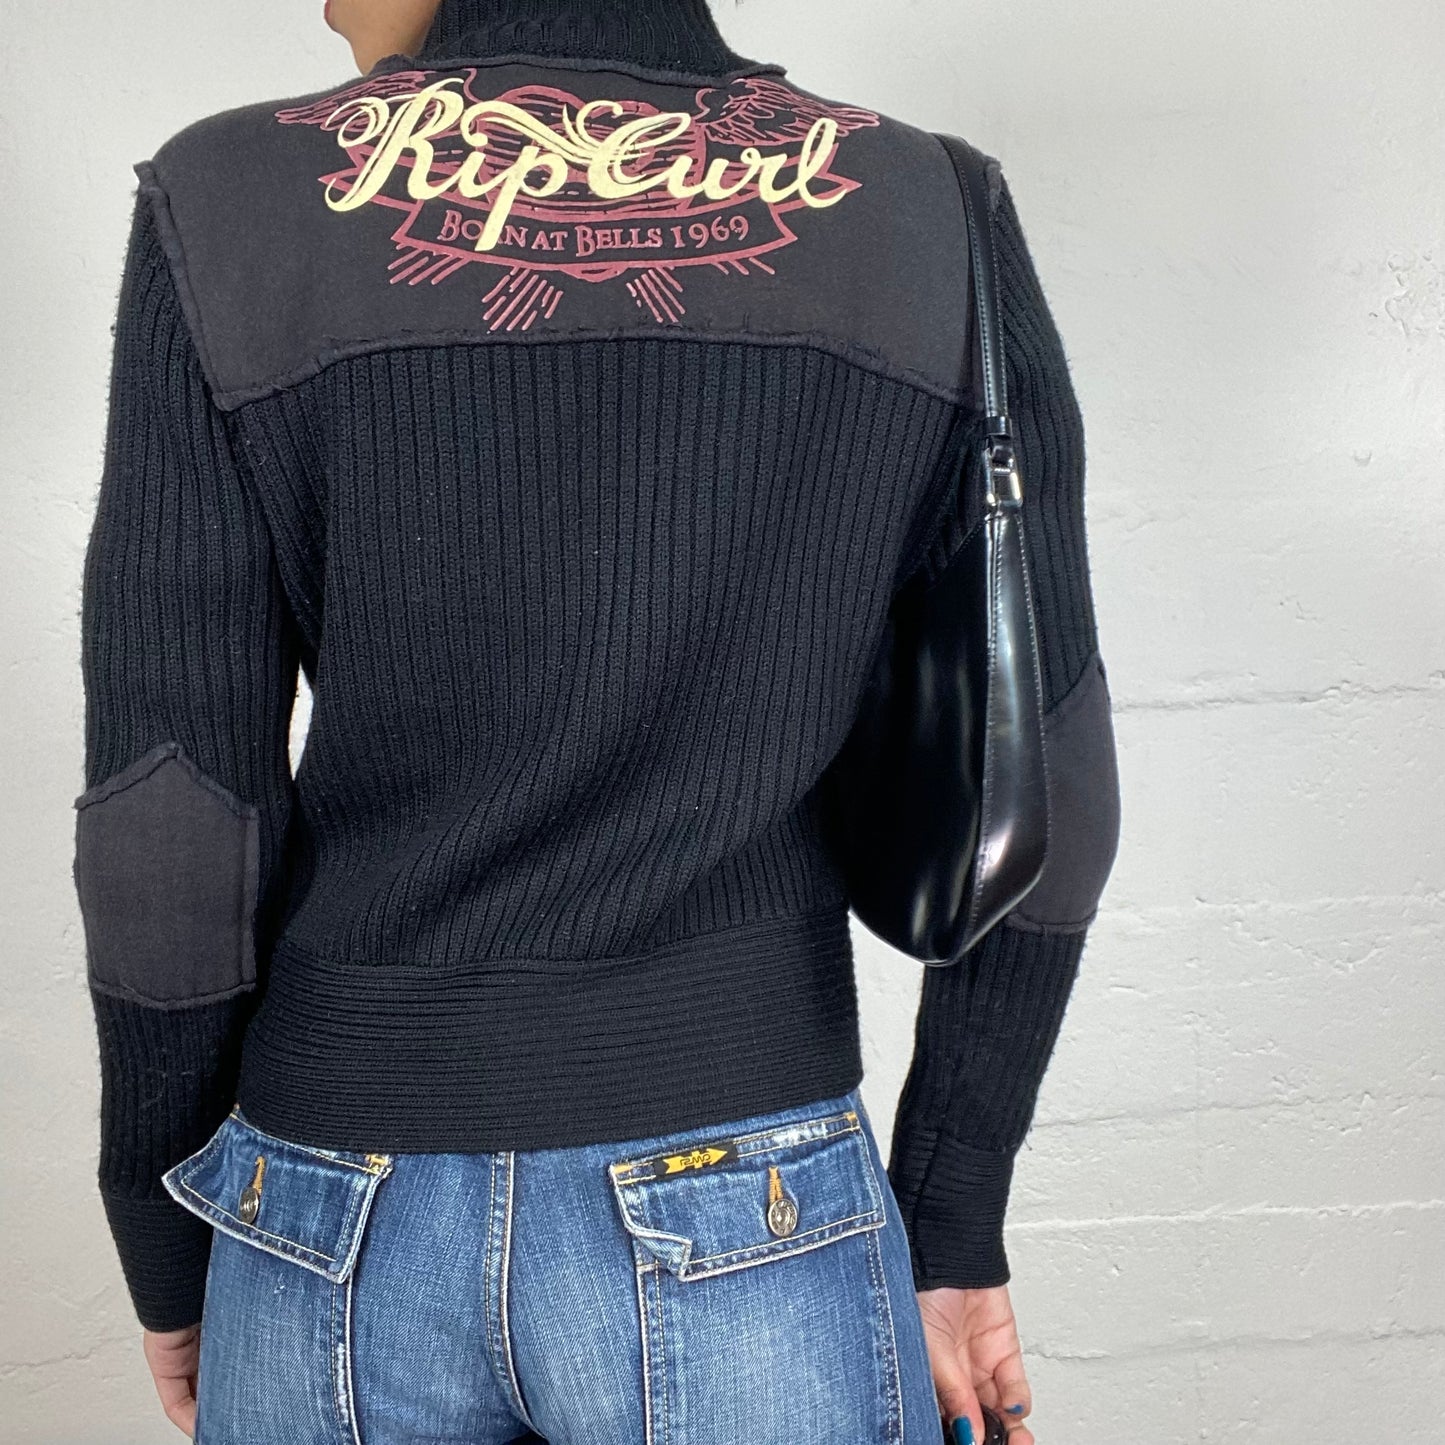 Vintage 2000's Rip Curl Sporty Black Zip Up Knitted Sweater with Back Brand Name Print (M)